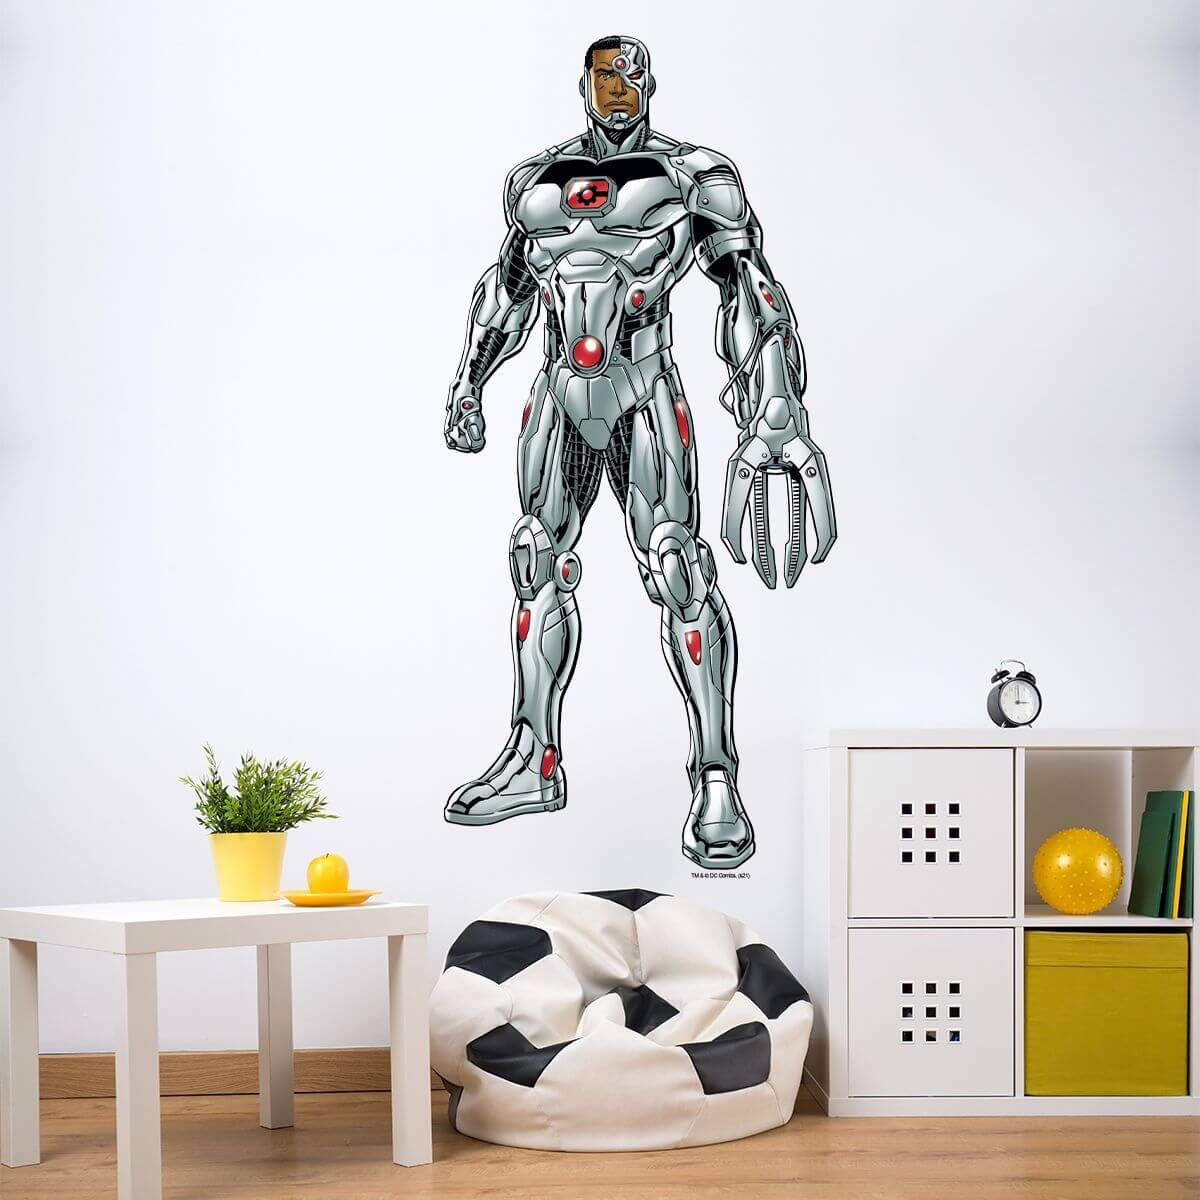 Kismet Decals Cyborg Victorious Licensed Wall Sticker - Easy DIY Justice League Home & Room Decor Wall Art - Kismet Decals